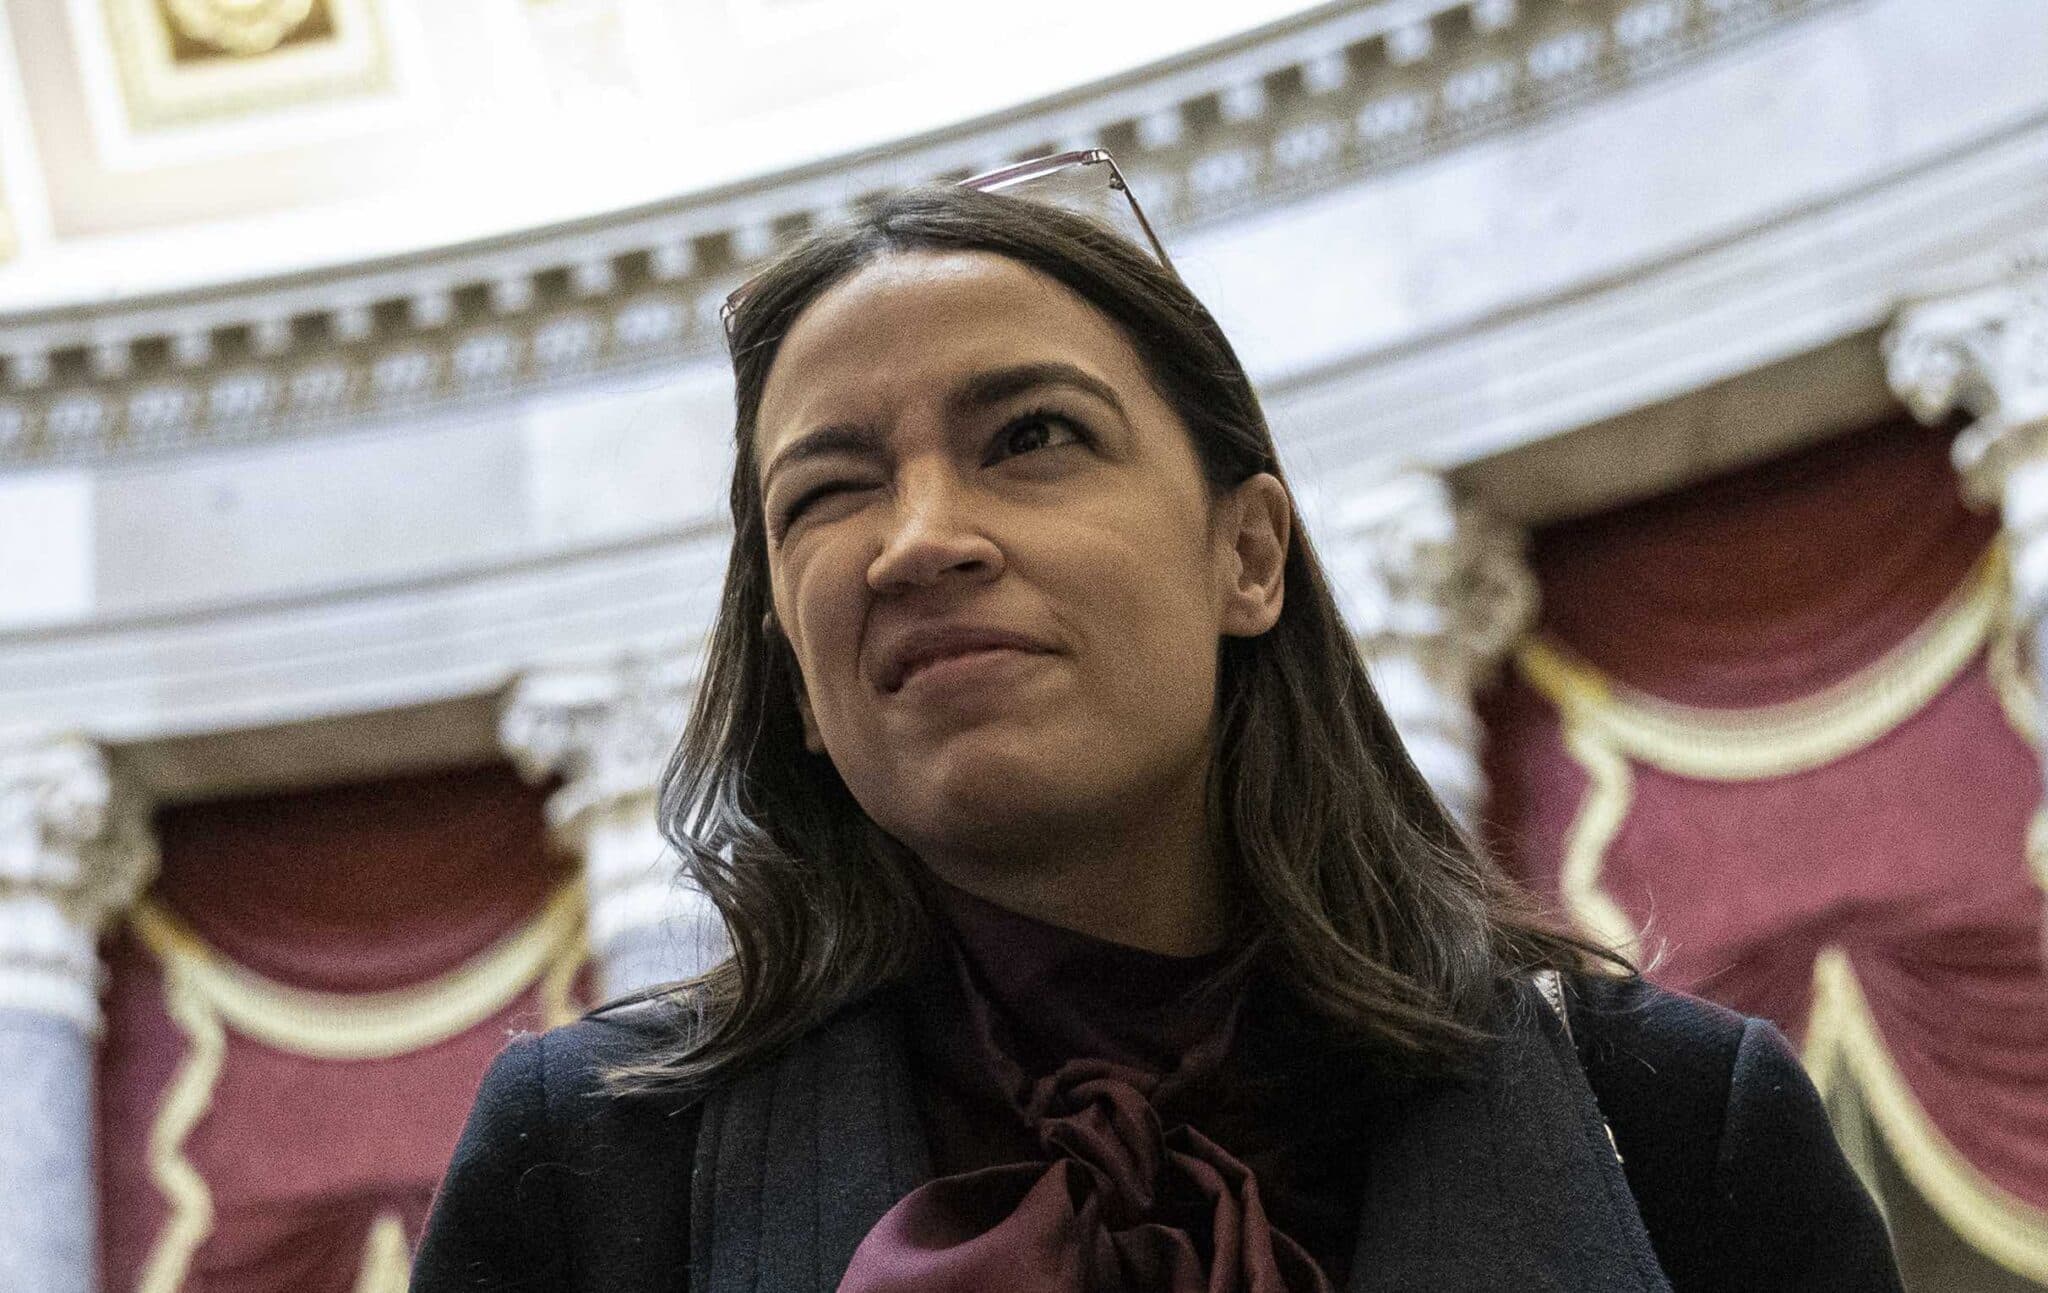 Aoc Receives Backlash For Selling 58 Tax The Rich Sweatshirt